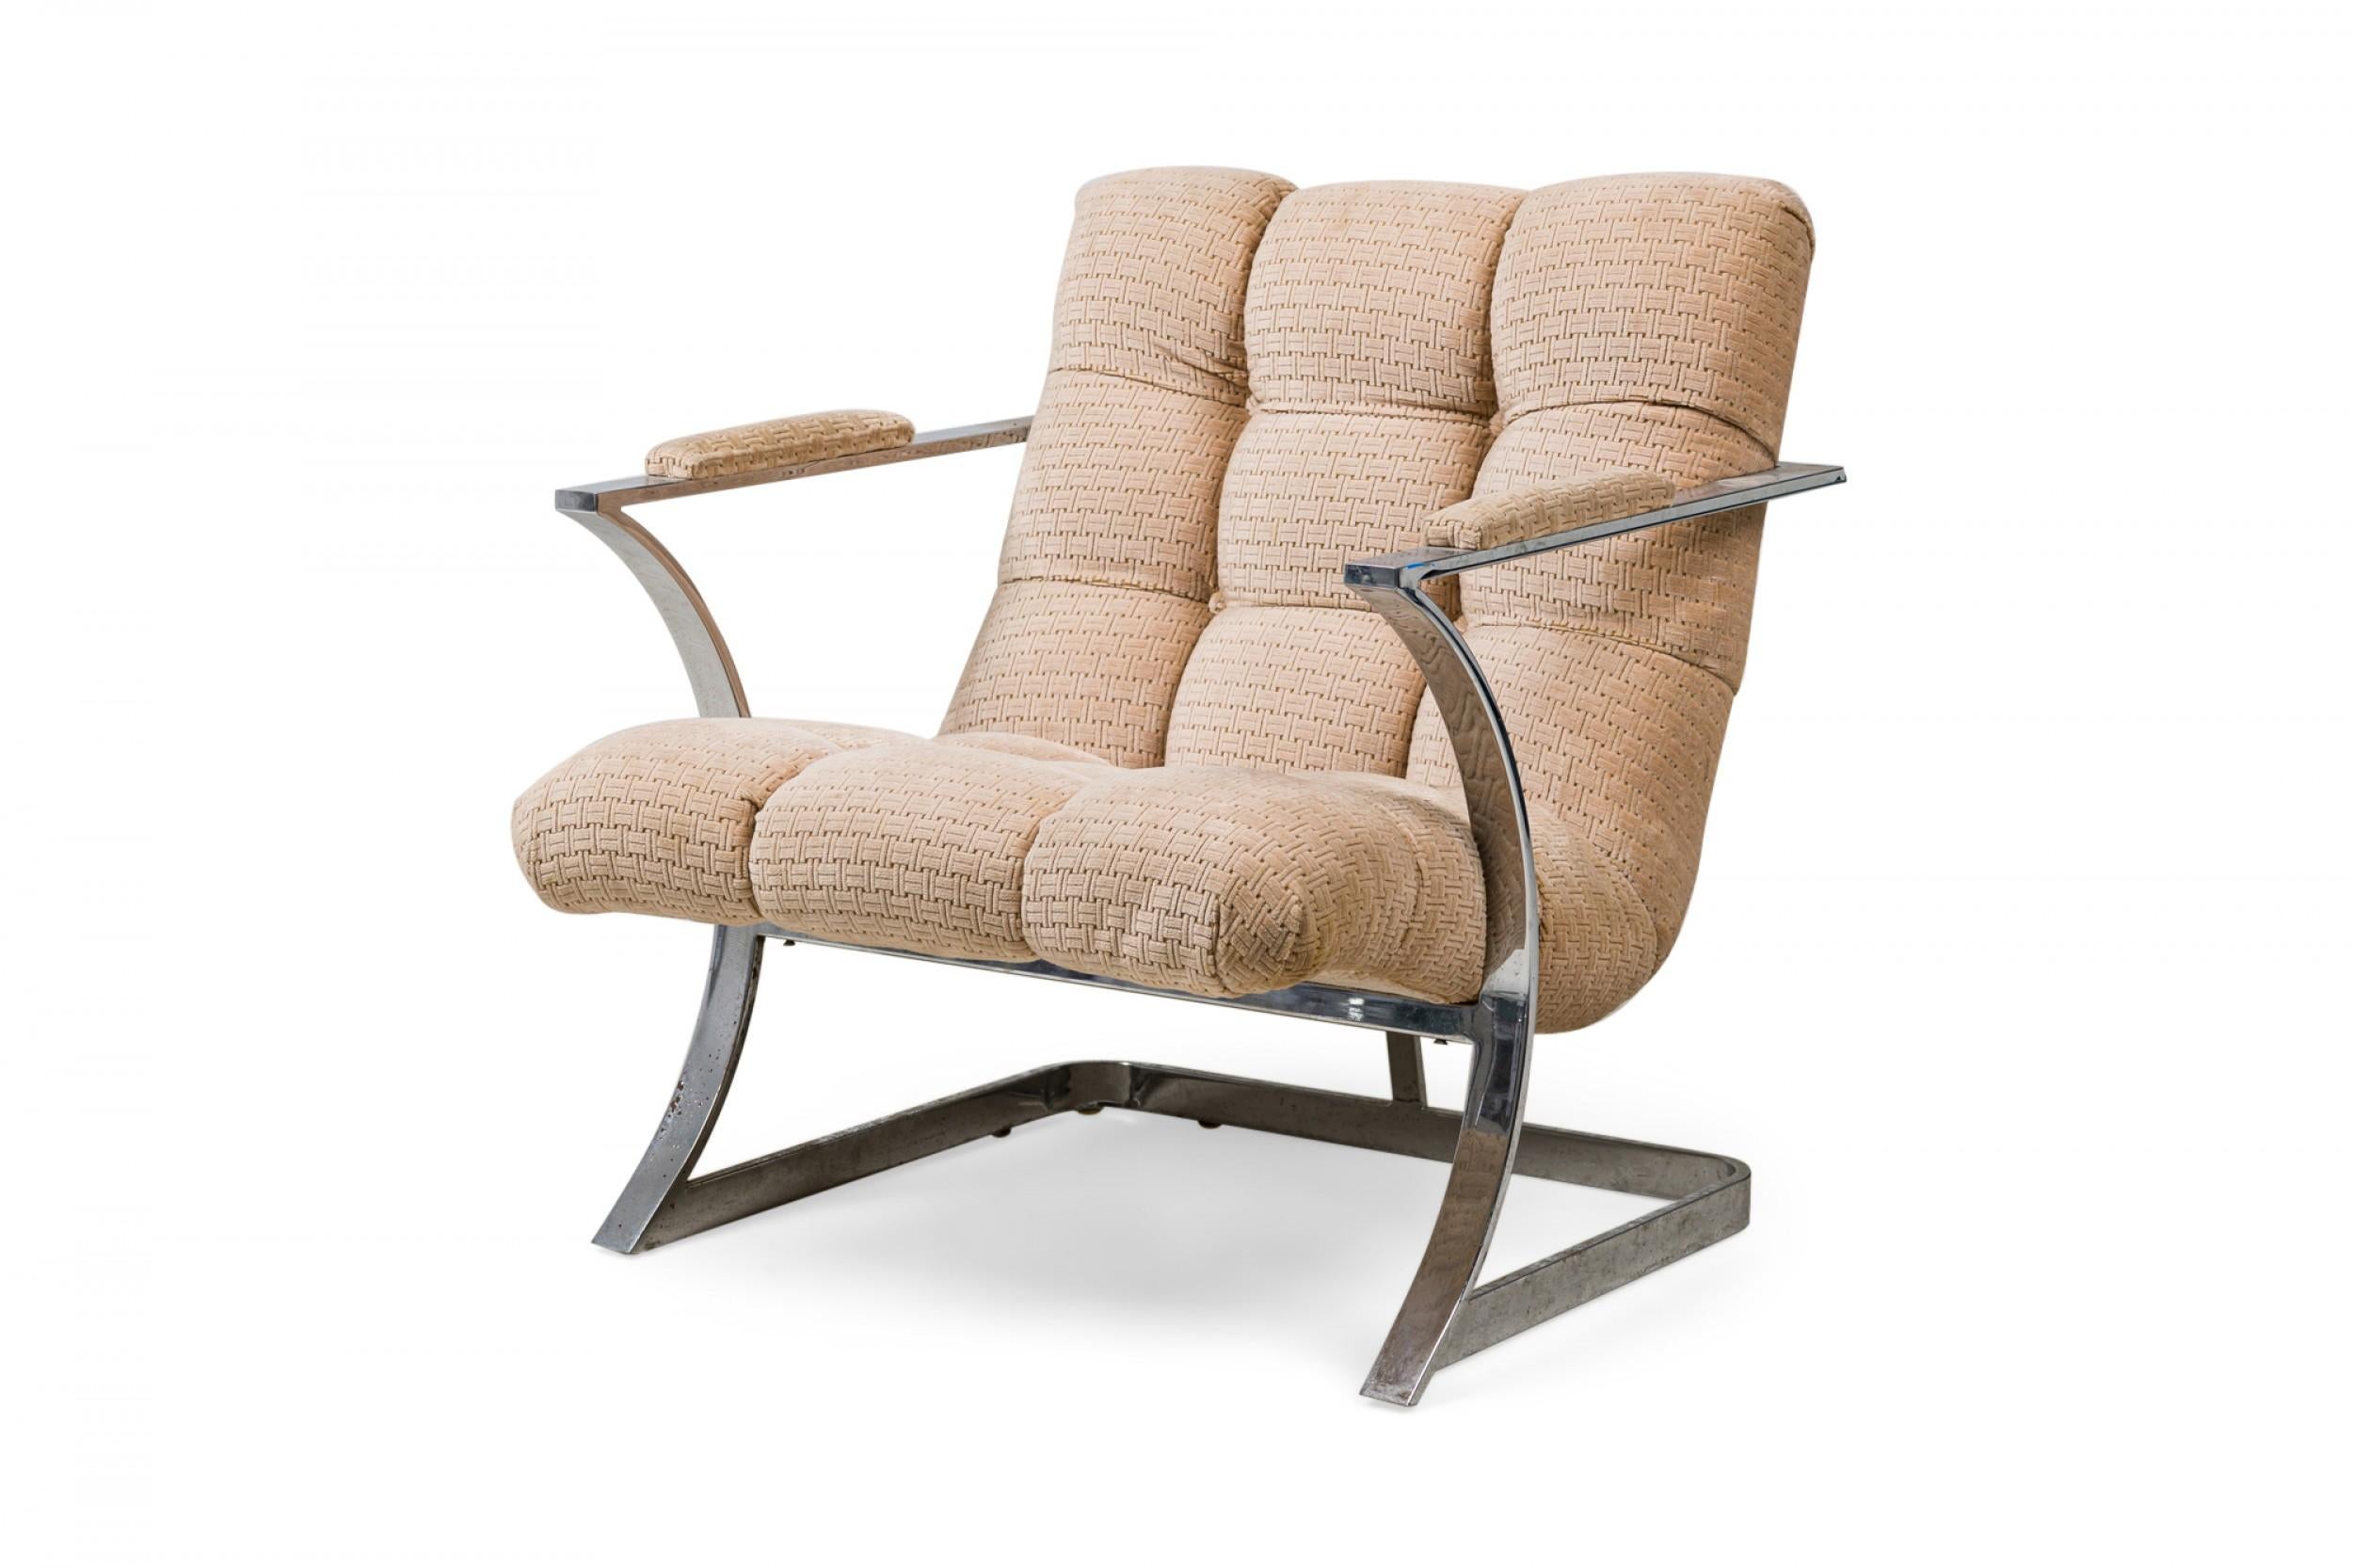 Midcentury American polished silver metal flat bar armchair with a curved concave frame, the arms unified with the back as one piece, upholstered in a button tufted textured beige fabric. (manner of MILO BAUGHMAN)